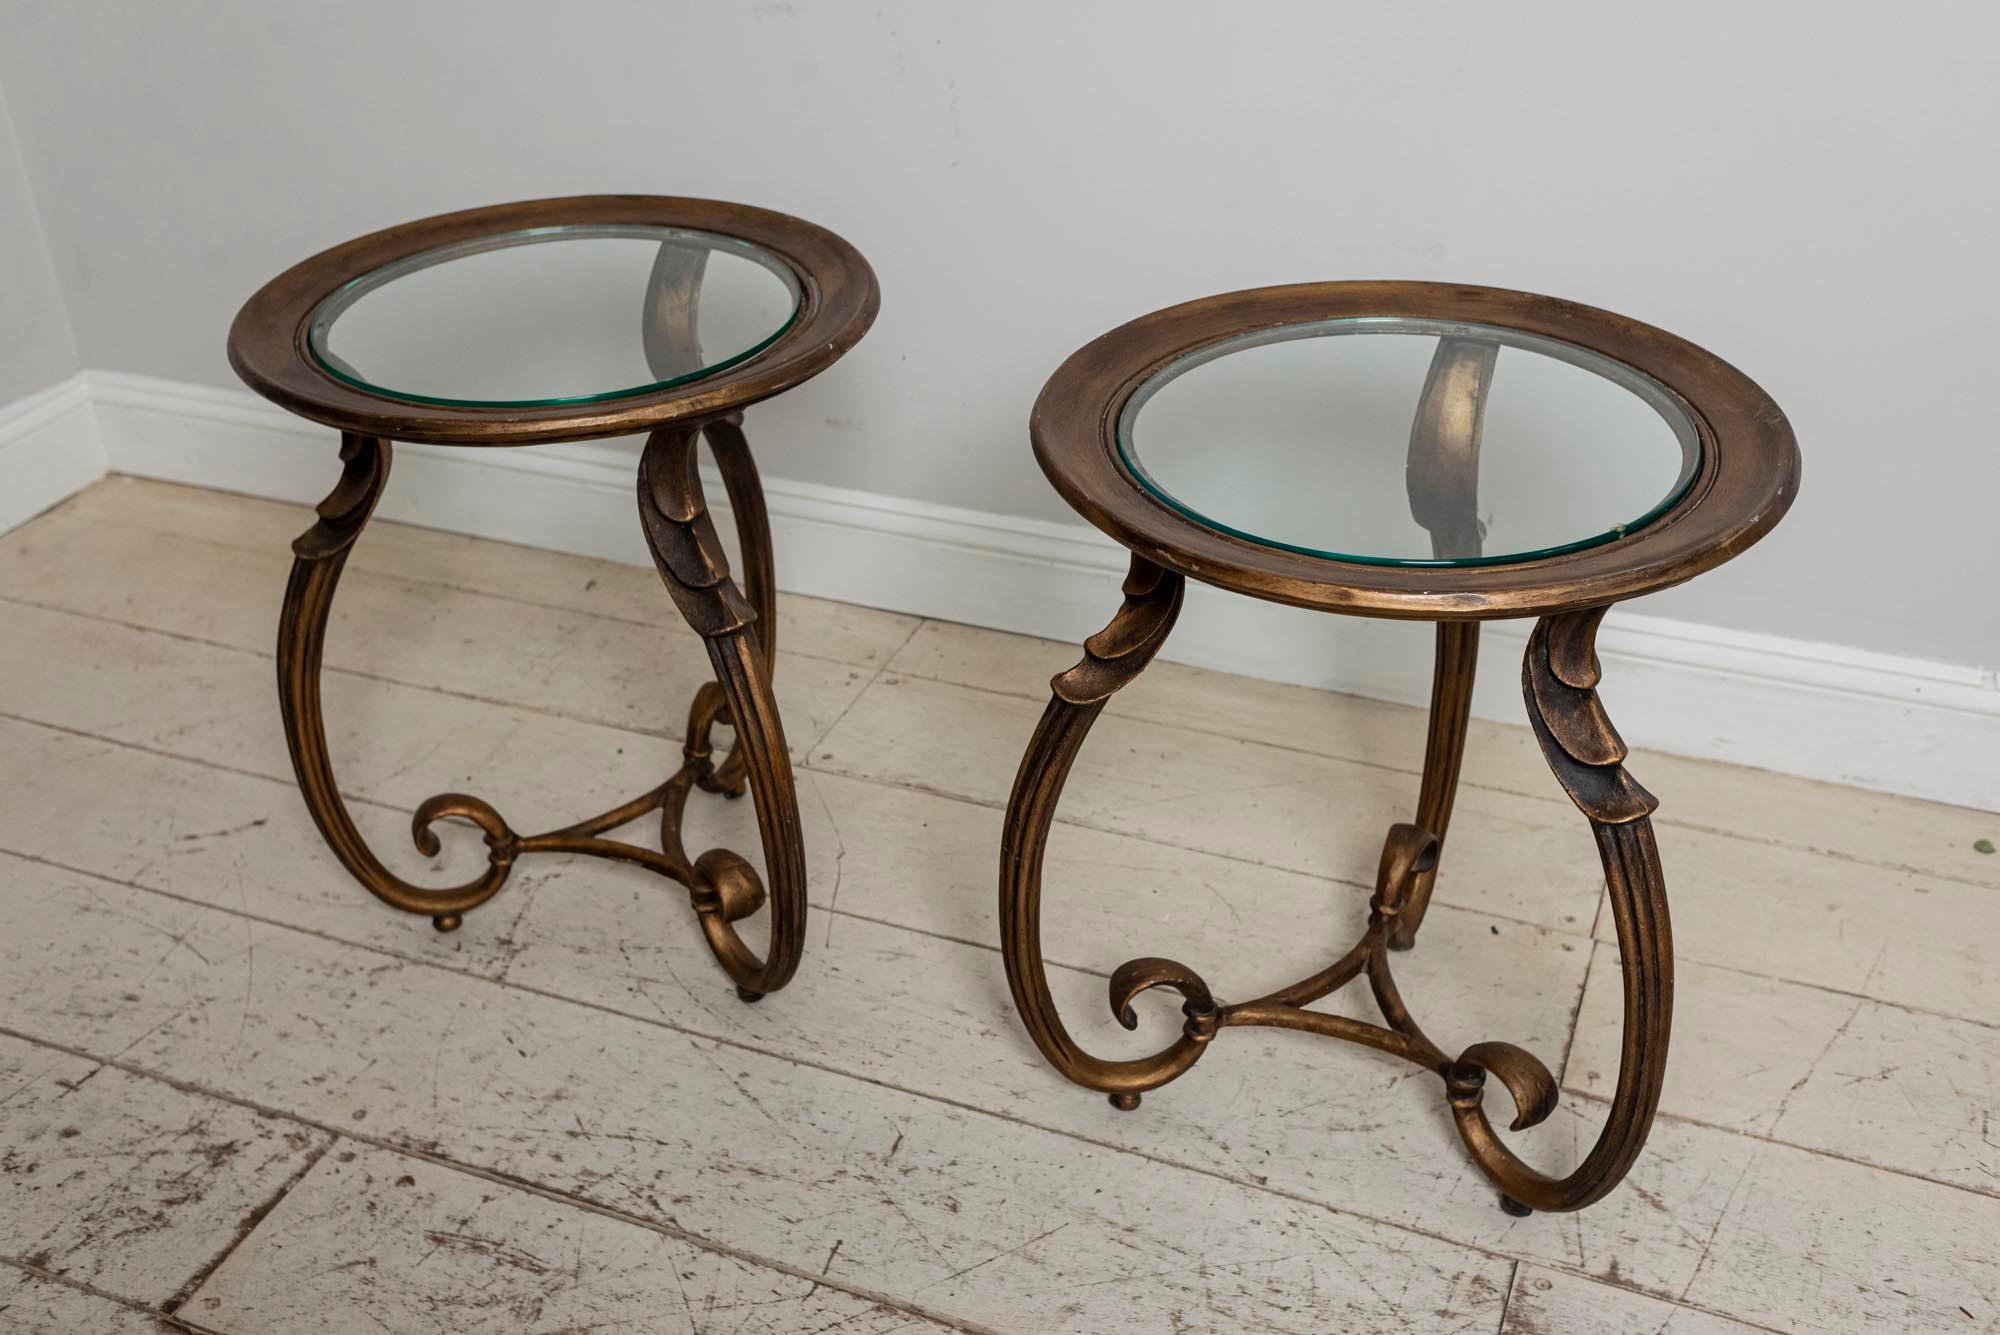 Art Nouveau Pair of 1930s French Bronzed Scrolled Leg Side Tables with Glass Inserts